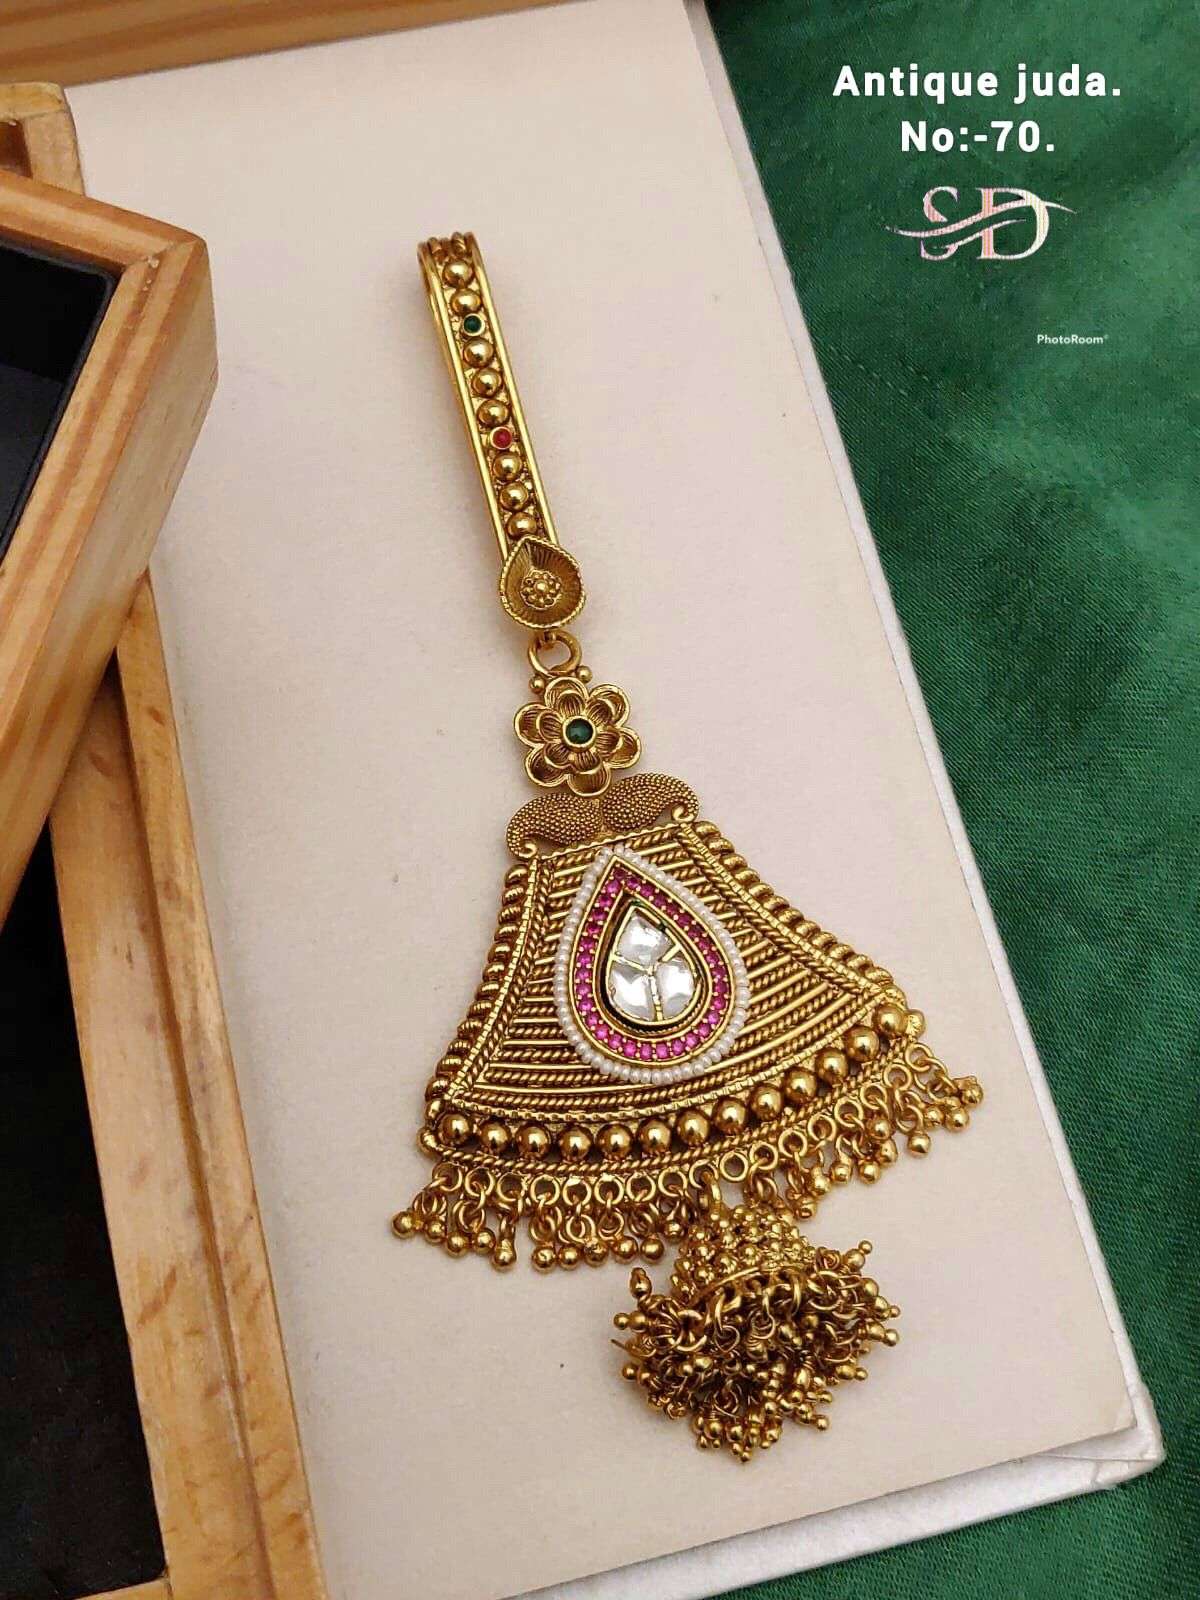 ANTIQUE JUDA BY FASHID WHOLESALE TRADITIONAL ARTIFICIAL JEWELLERY FOR INDIAN ATTIRE AT EXCLUSIVE RANGE.